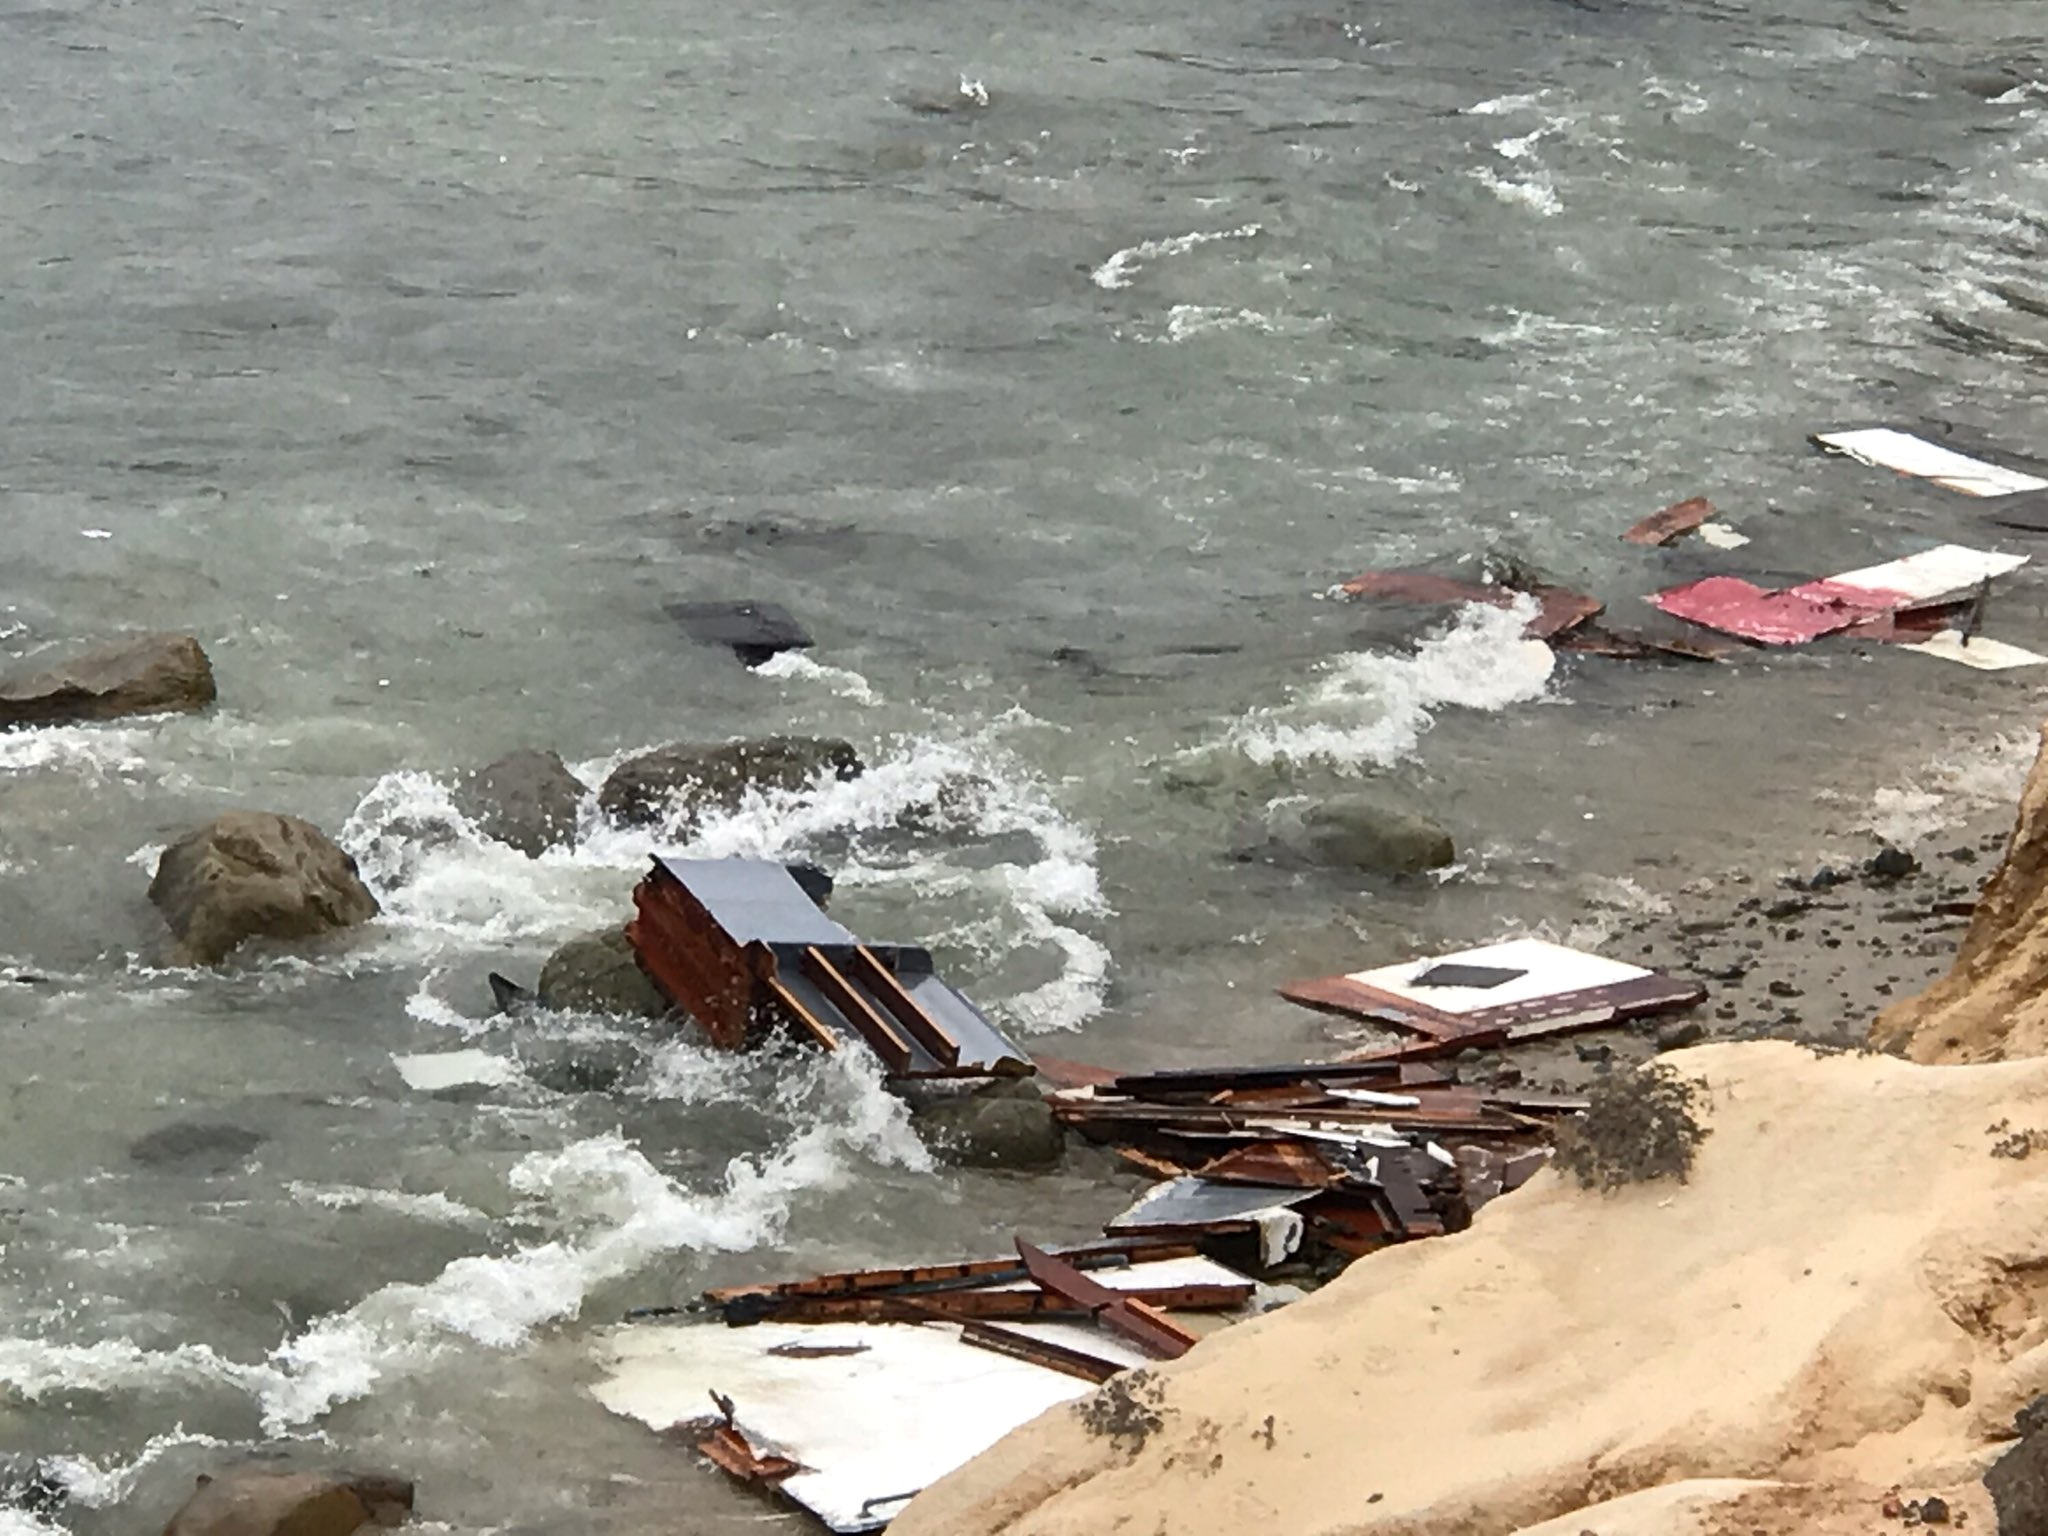 Four dead when suspected migrant-smuggling boat breaks apart off San Diego